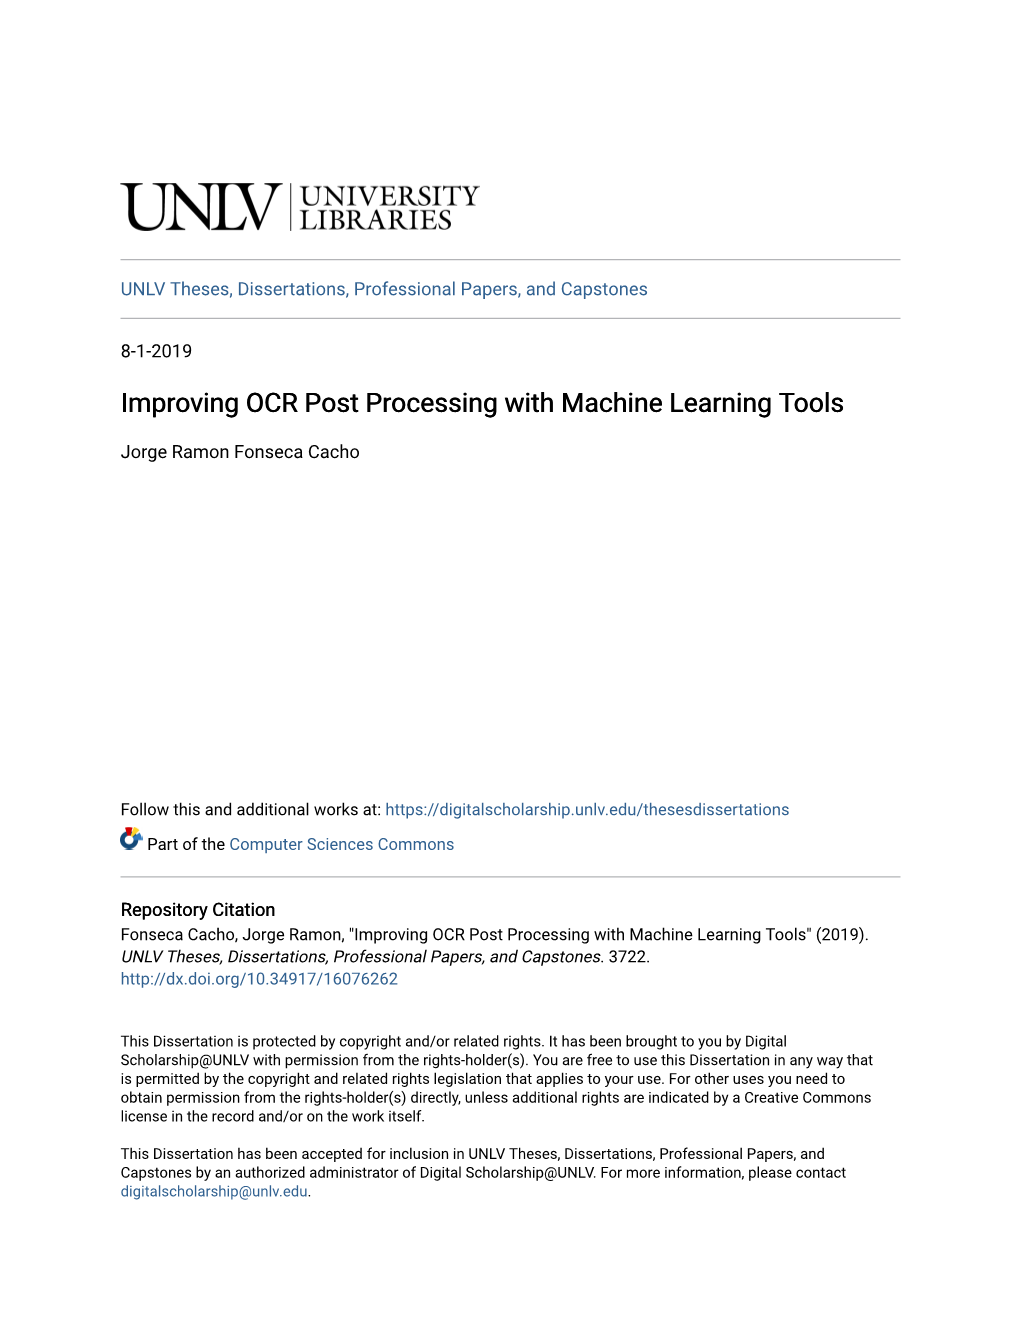 Improving OCR Post Processing with Machine Learning Tools